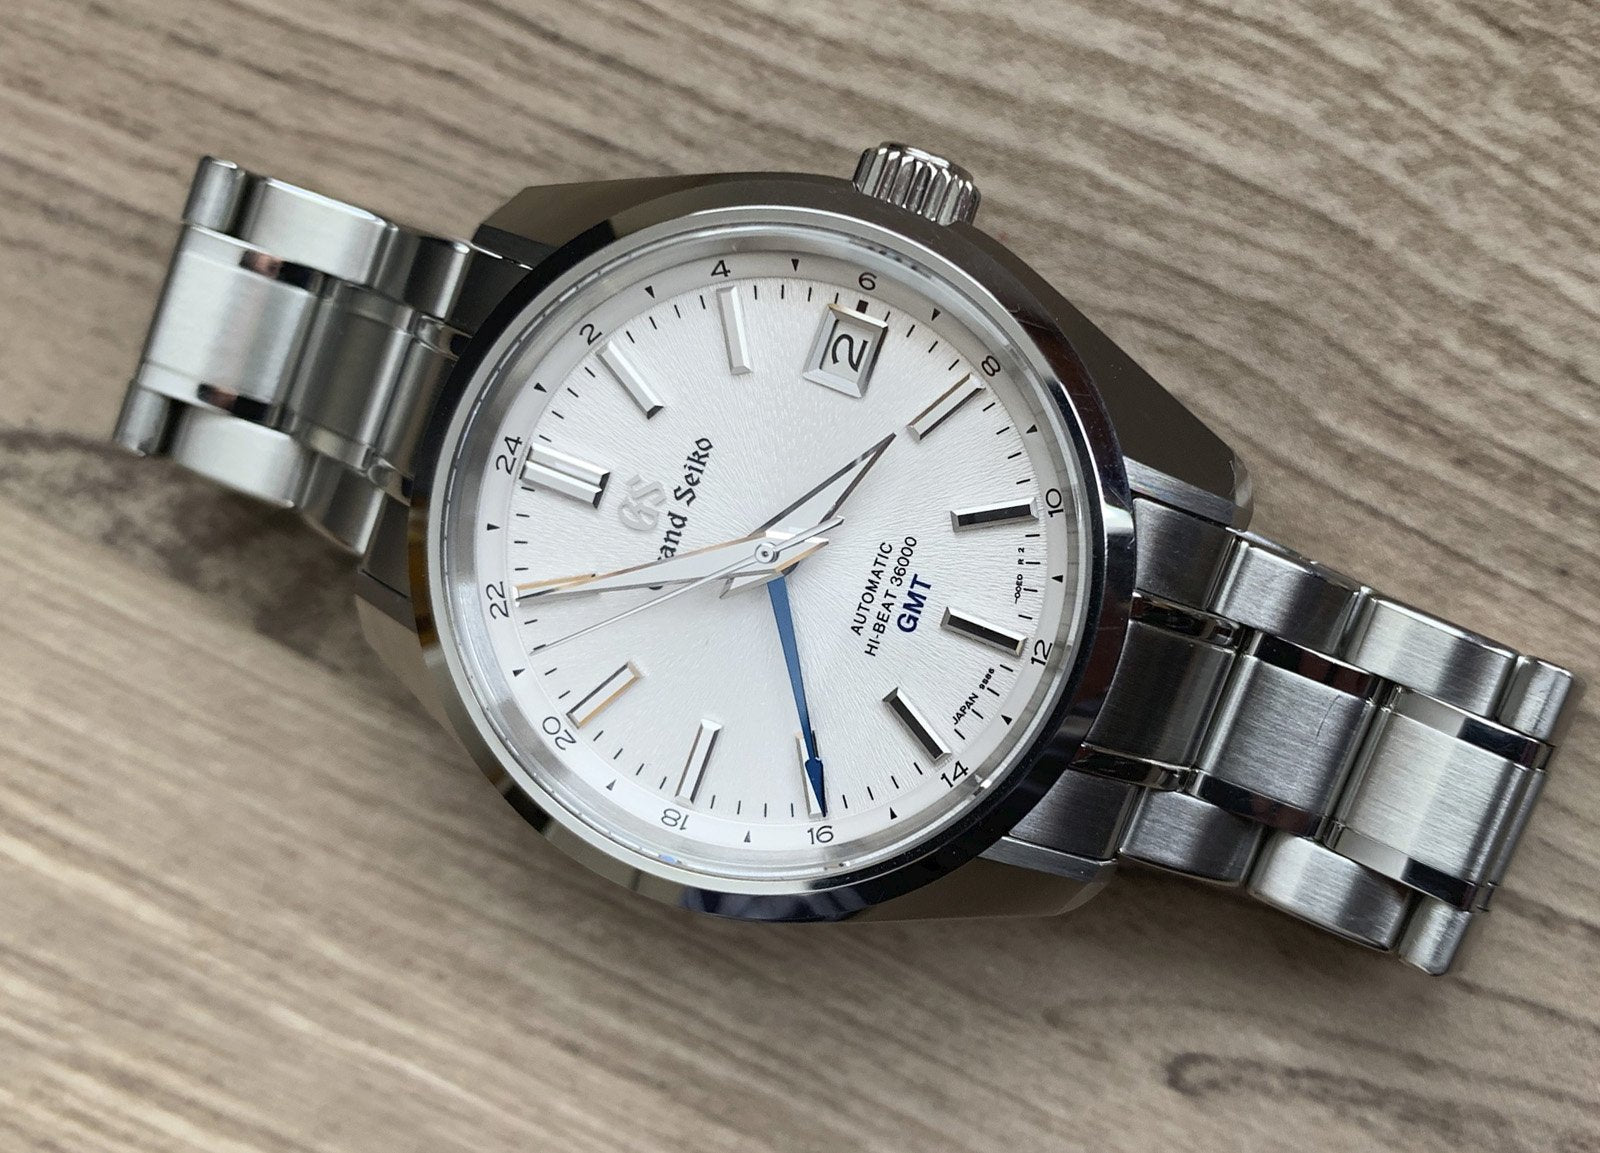 Grand Seiko 9S Movement - the new generation of mechanical calibers (P–  Strapcode